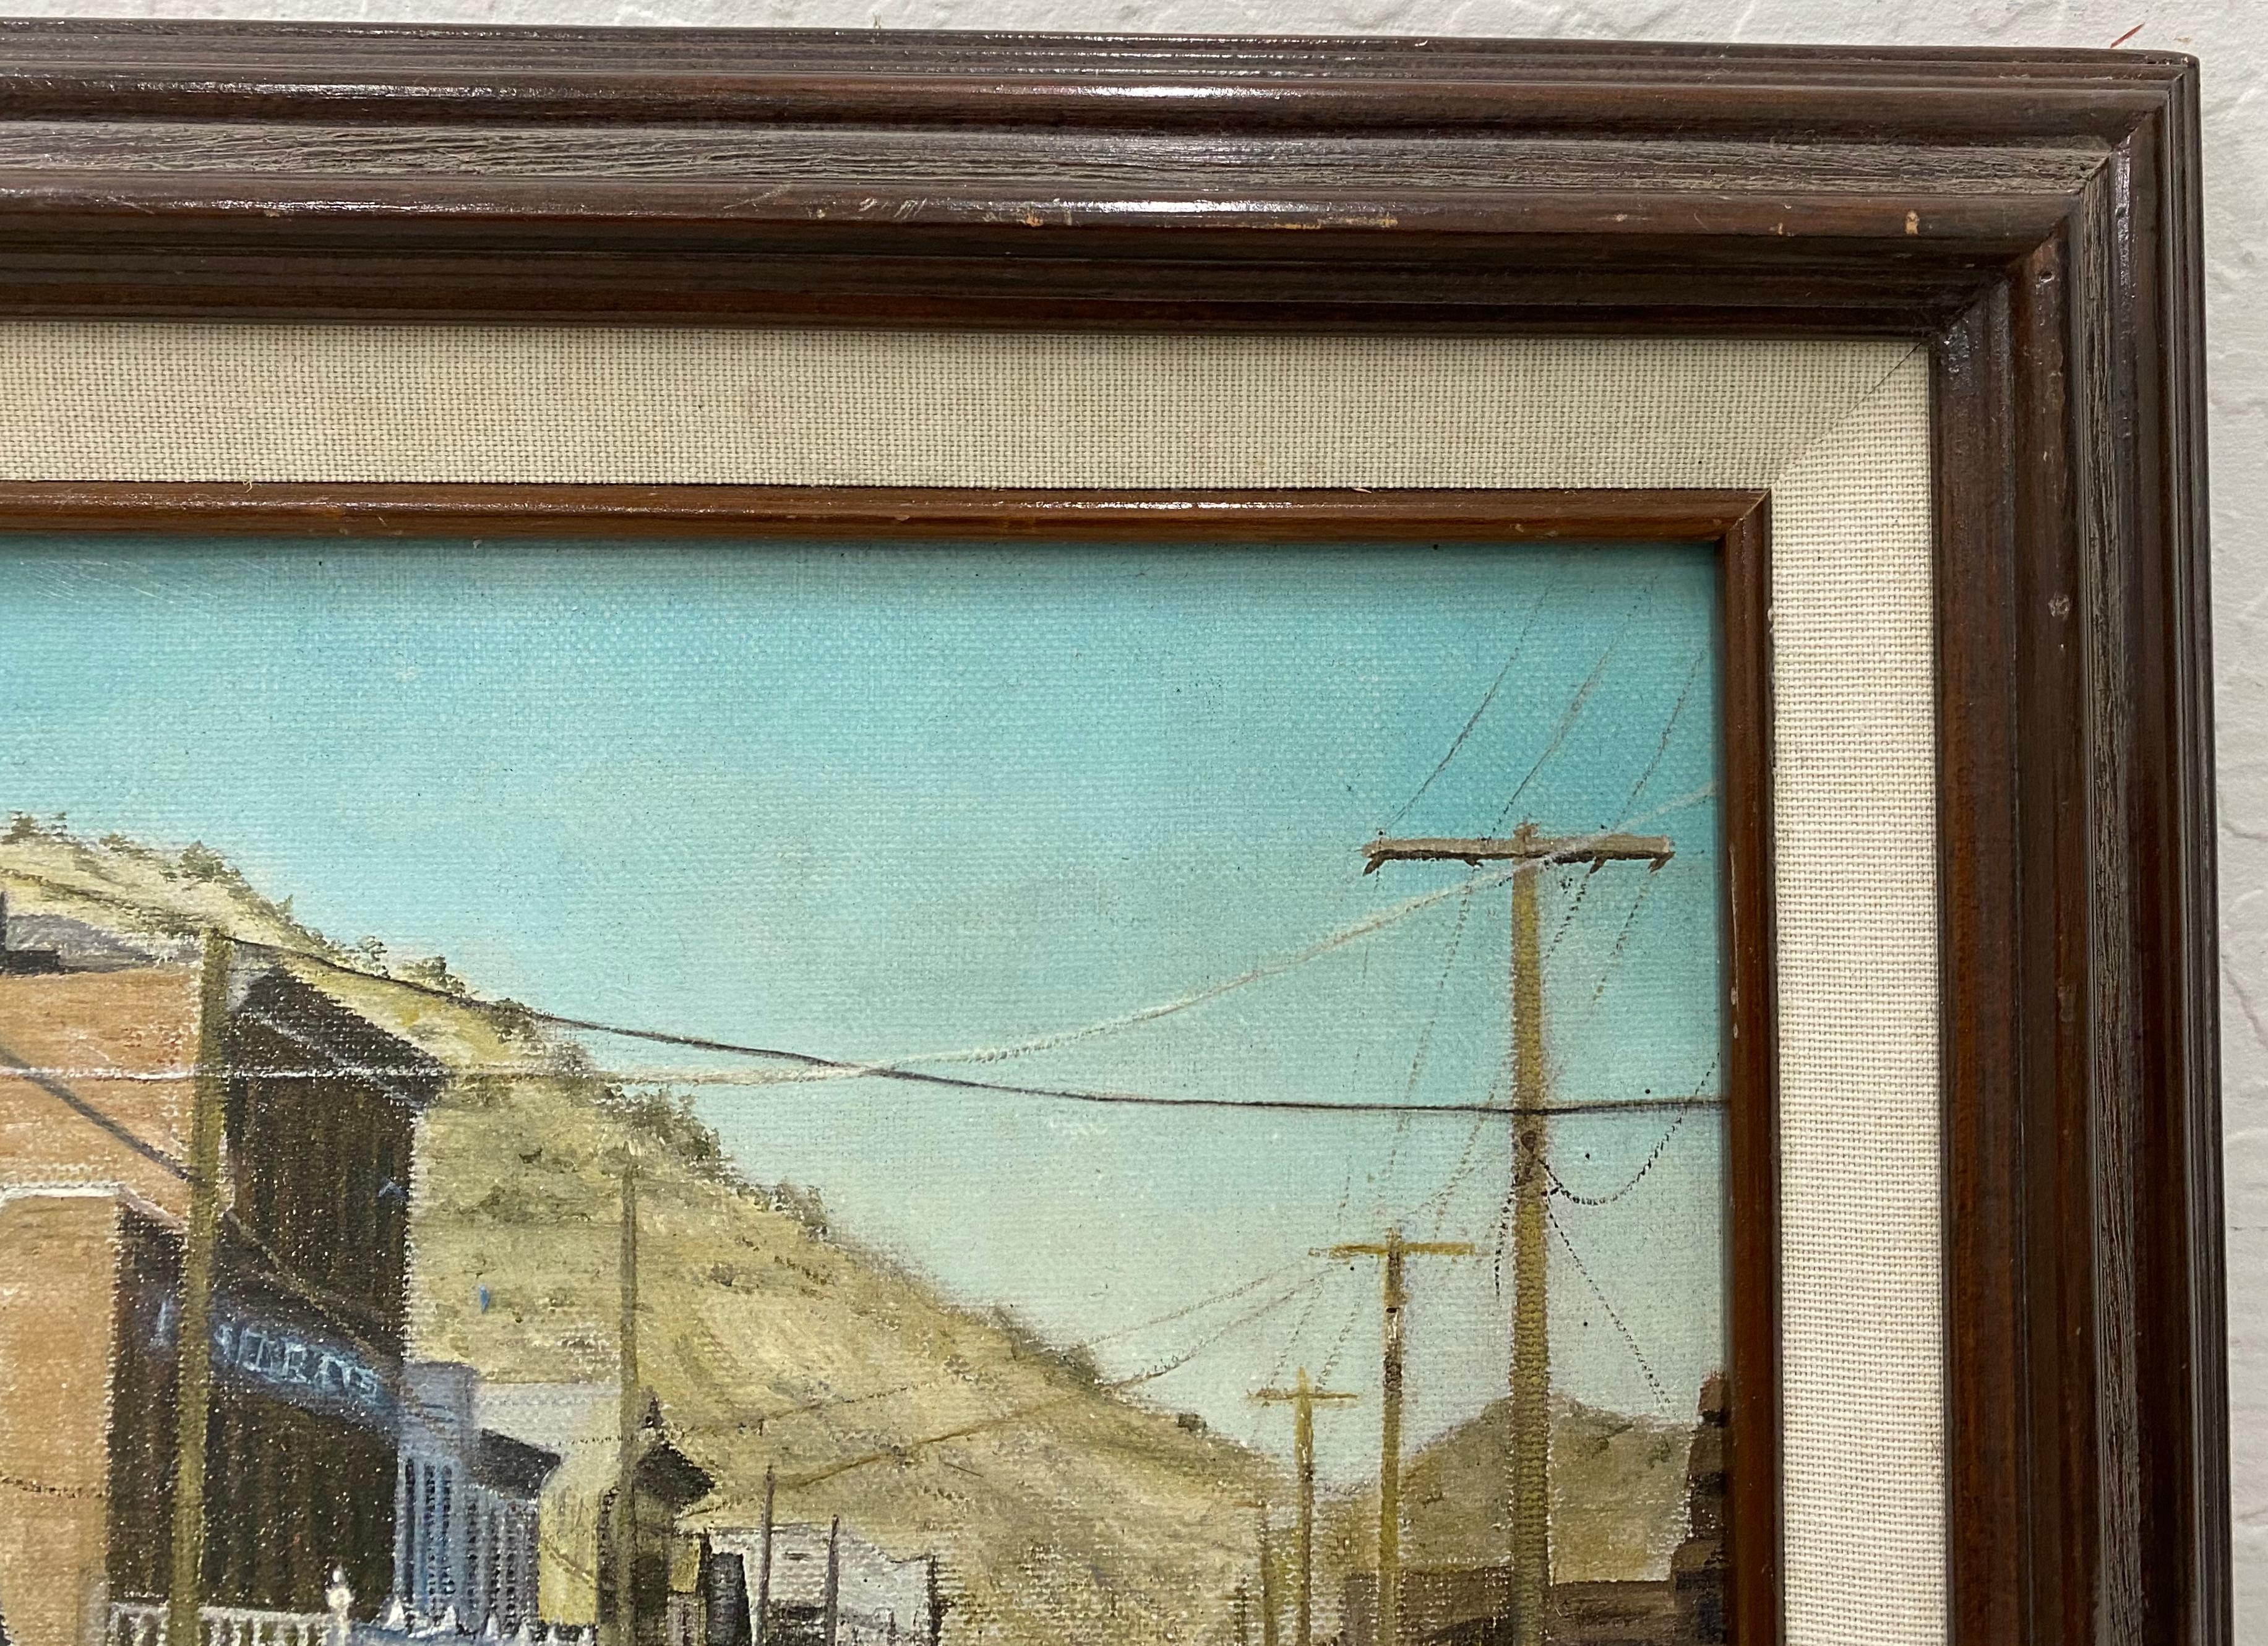 Vintage Oil Painting California Sierra Foothills Town by D. Grech c.1997

Original oil on masonite

Dimensions 22